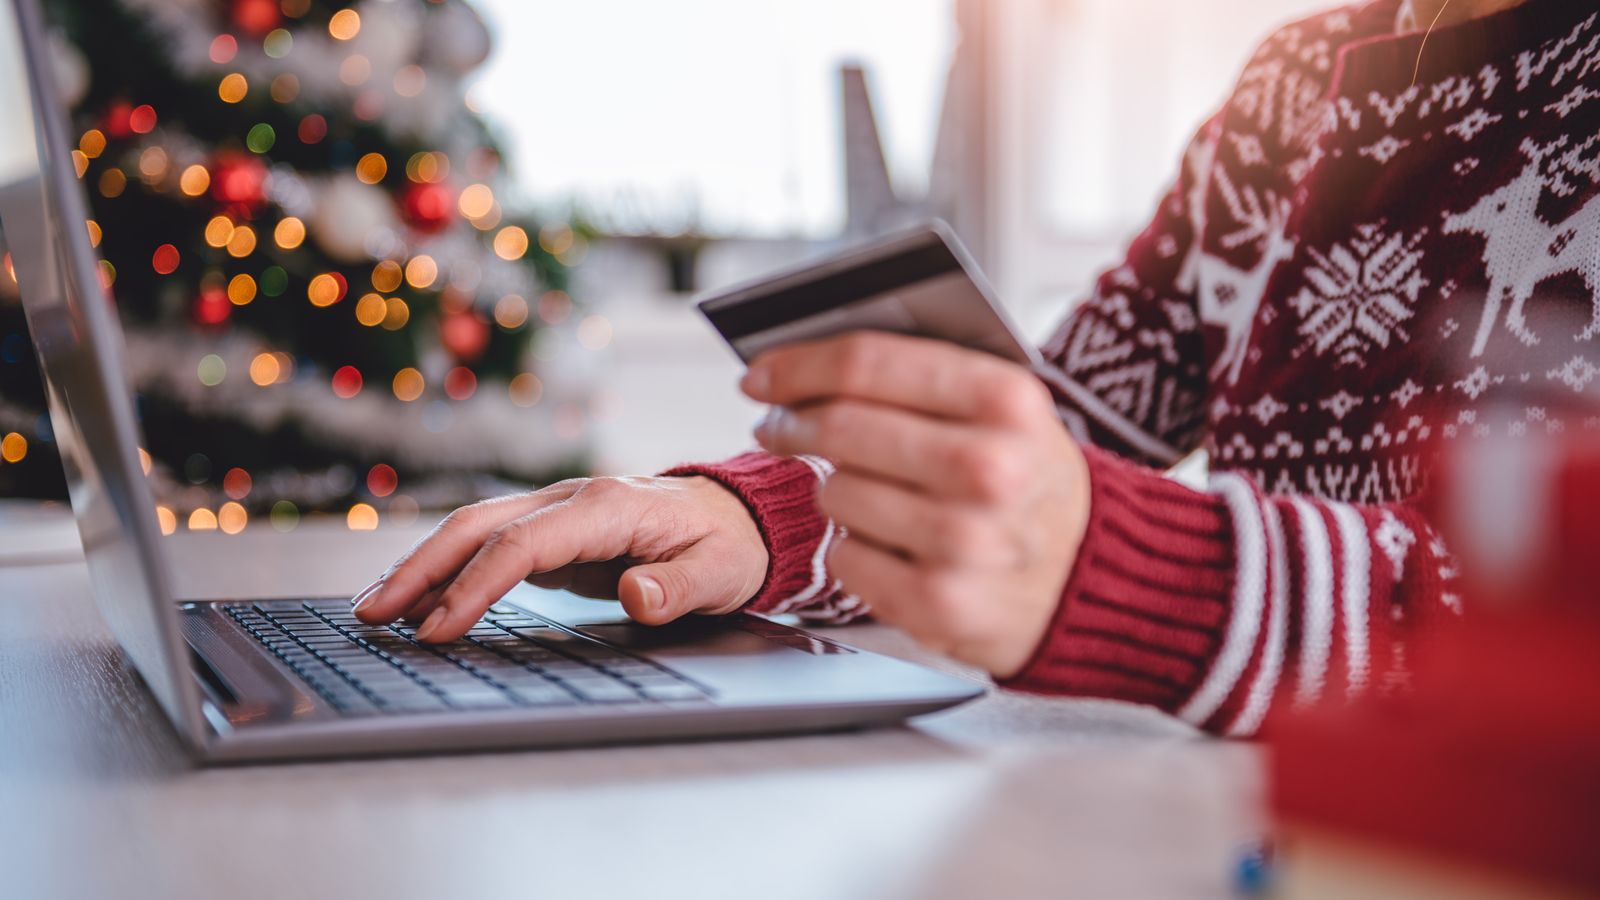 Christmas shoppers warned about fake online reviews - here's how to protect yourself